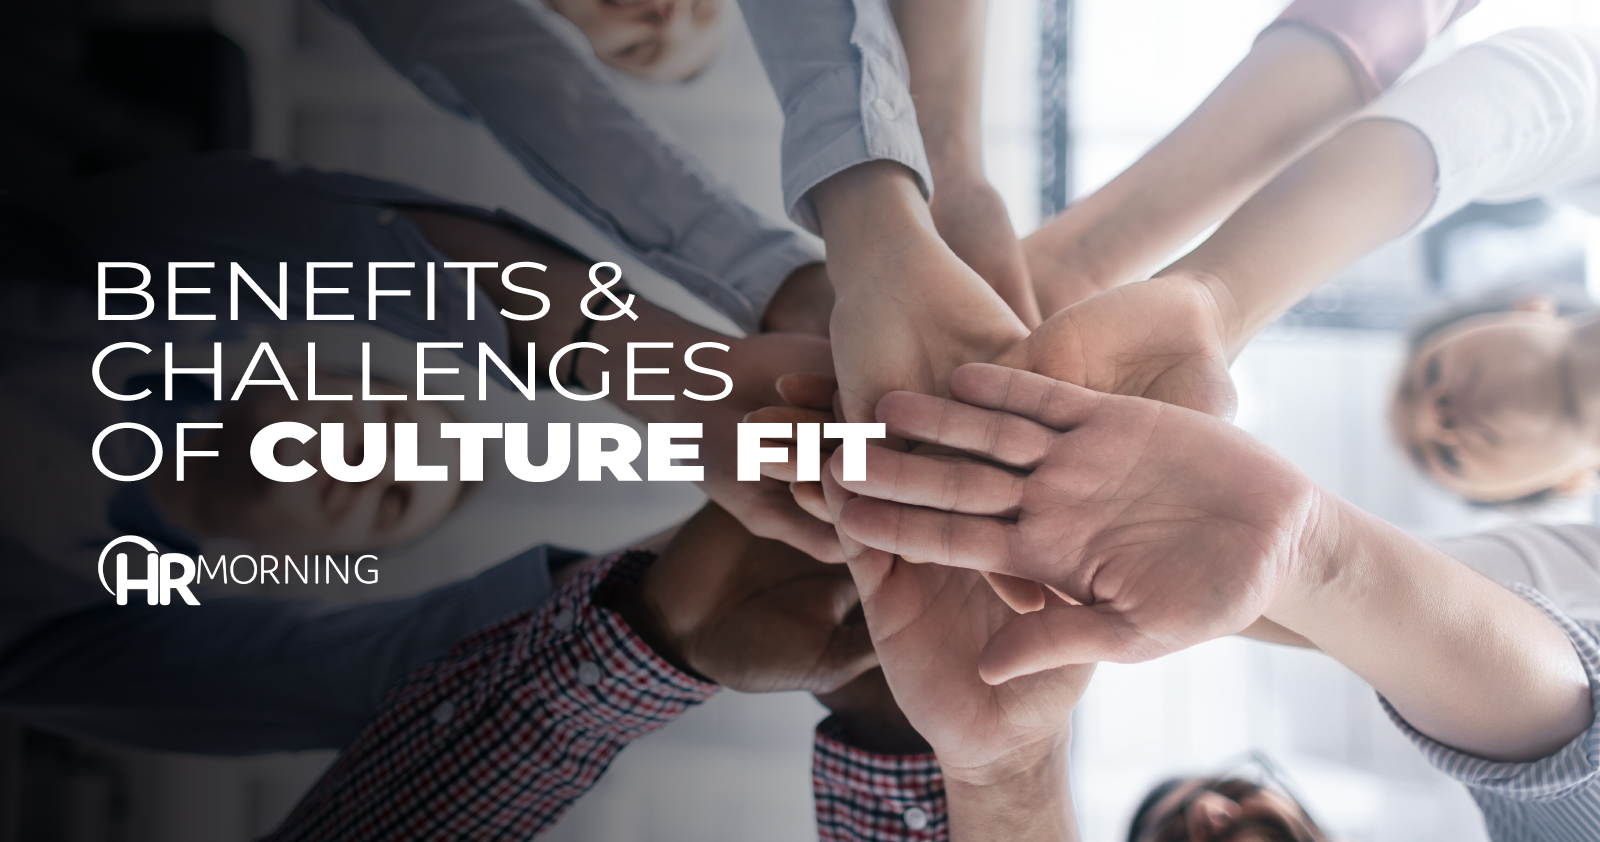 Benefits & challenges of culture fit